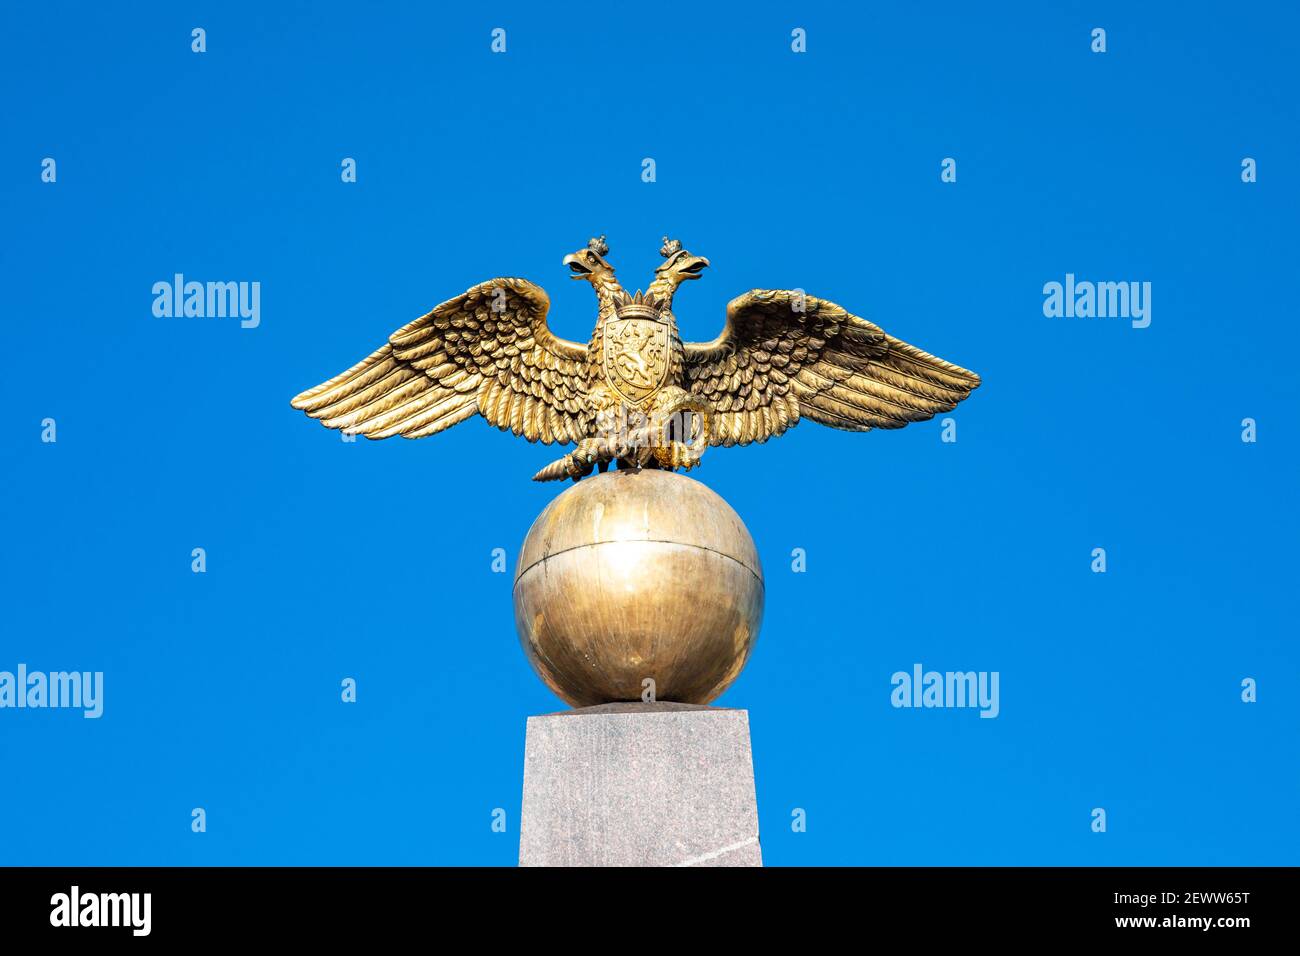 Stone of the Empress. Two-headed eagle of Russia on top of bronze globe. The monument was created by Carl Ludwig Engel in 1835. Helsinki, Finland. Stock Photo